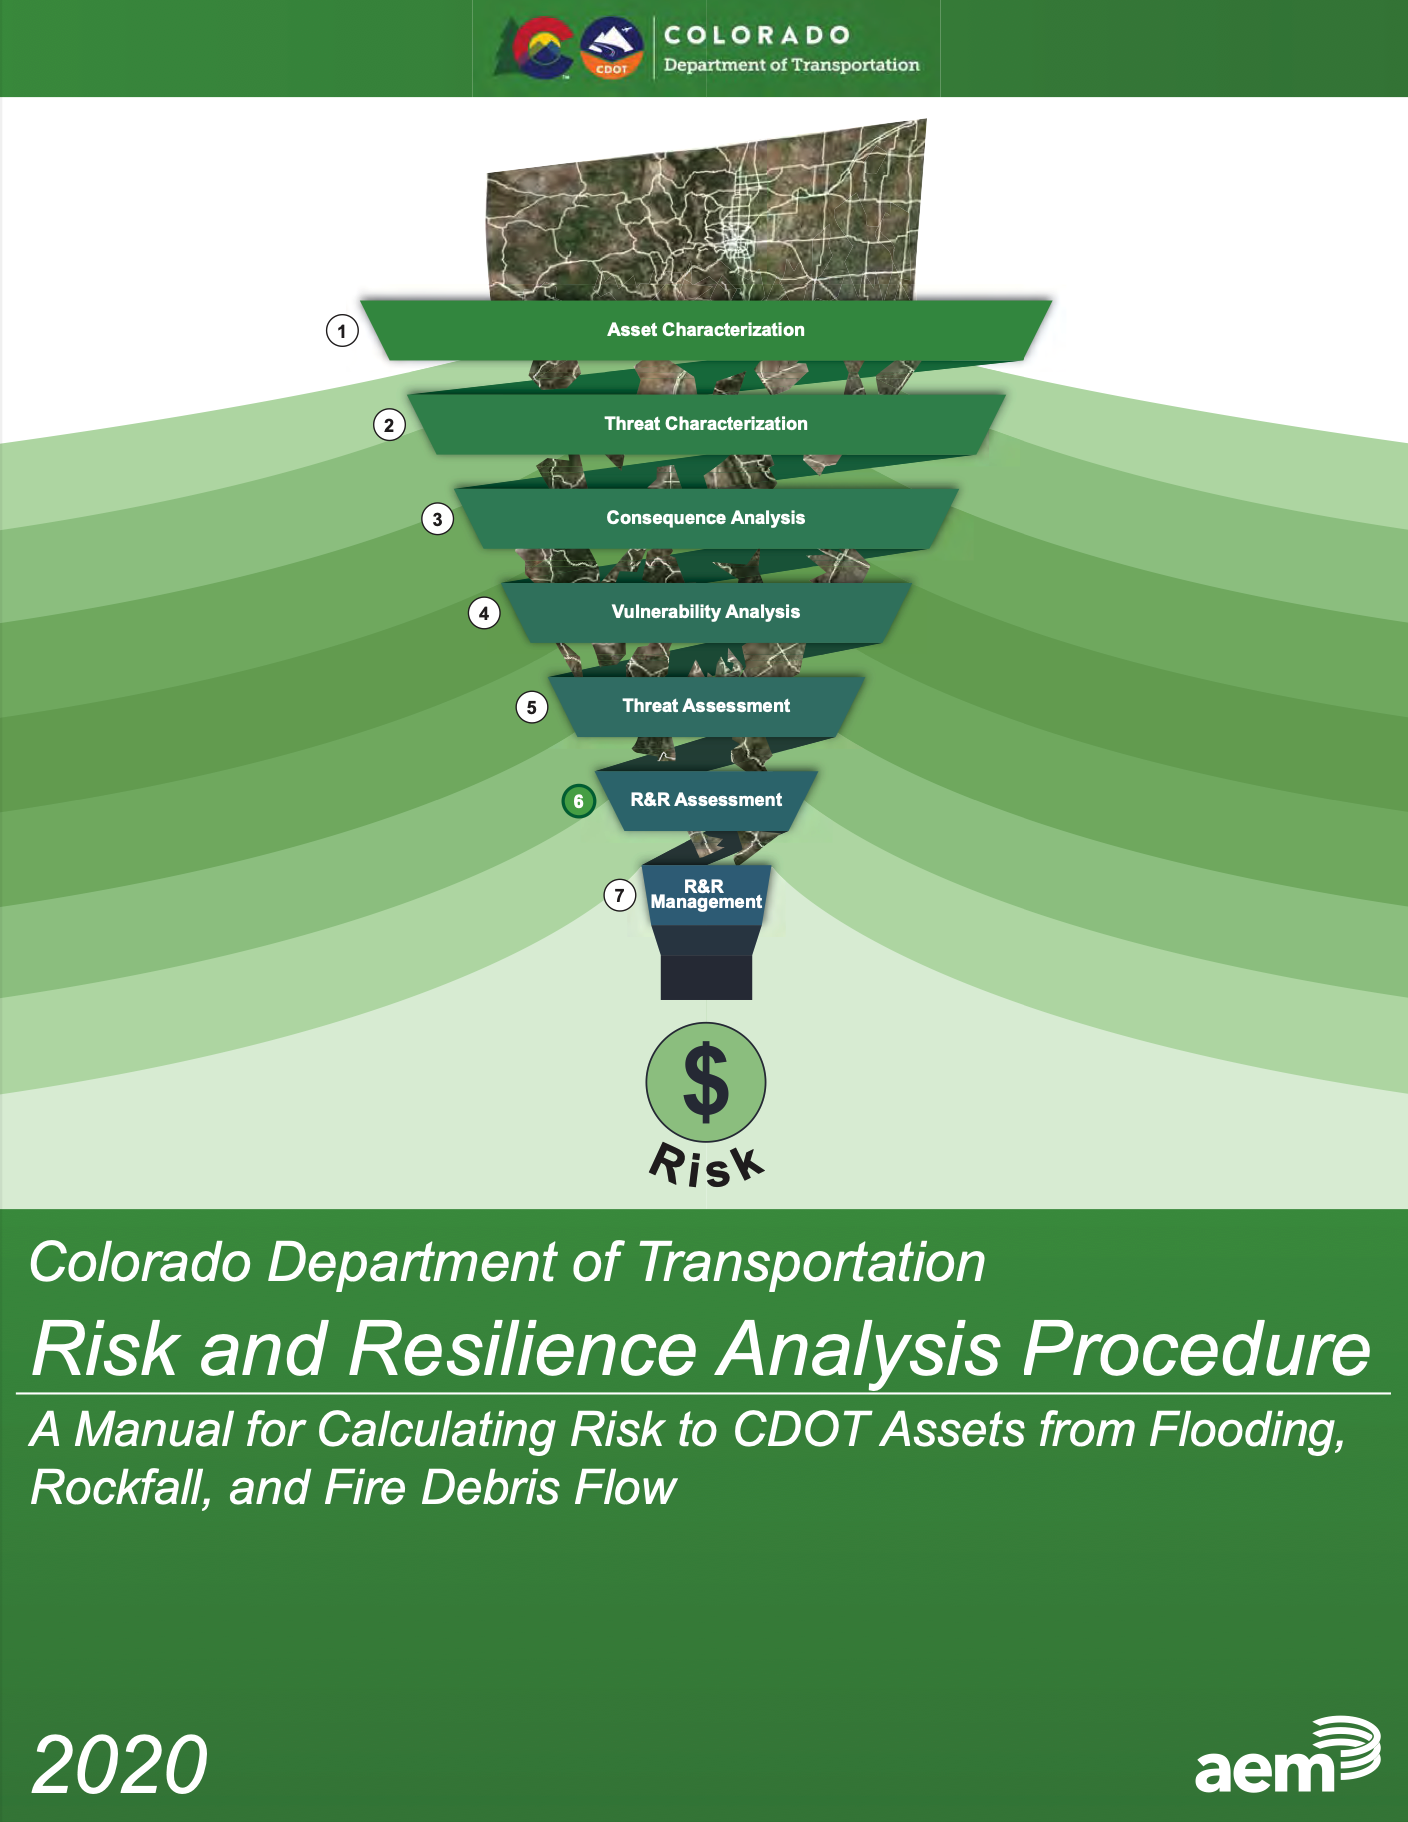 Figure 9. The seven-step Risk and Resilience Analysis Procedure from CDOT guides risk calculation and resilience prioritization. Courtesy of CDOT.